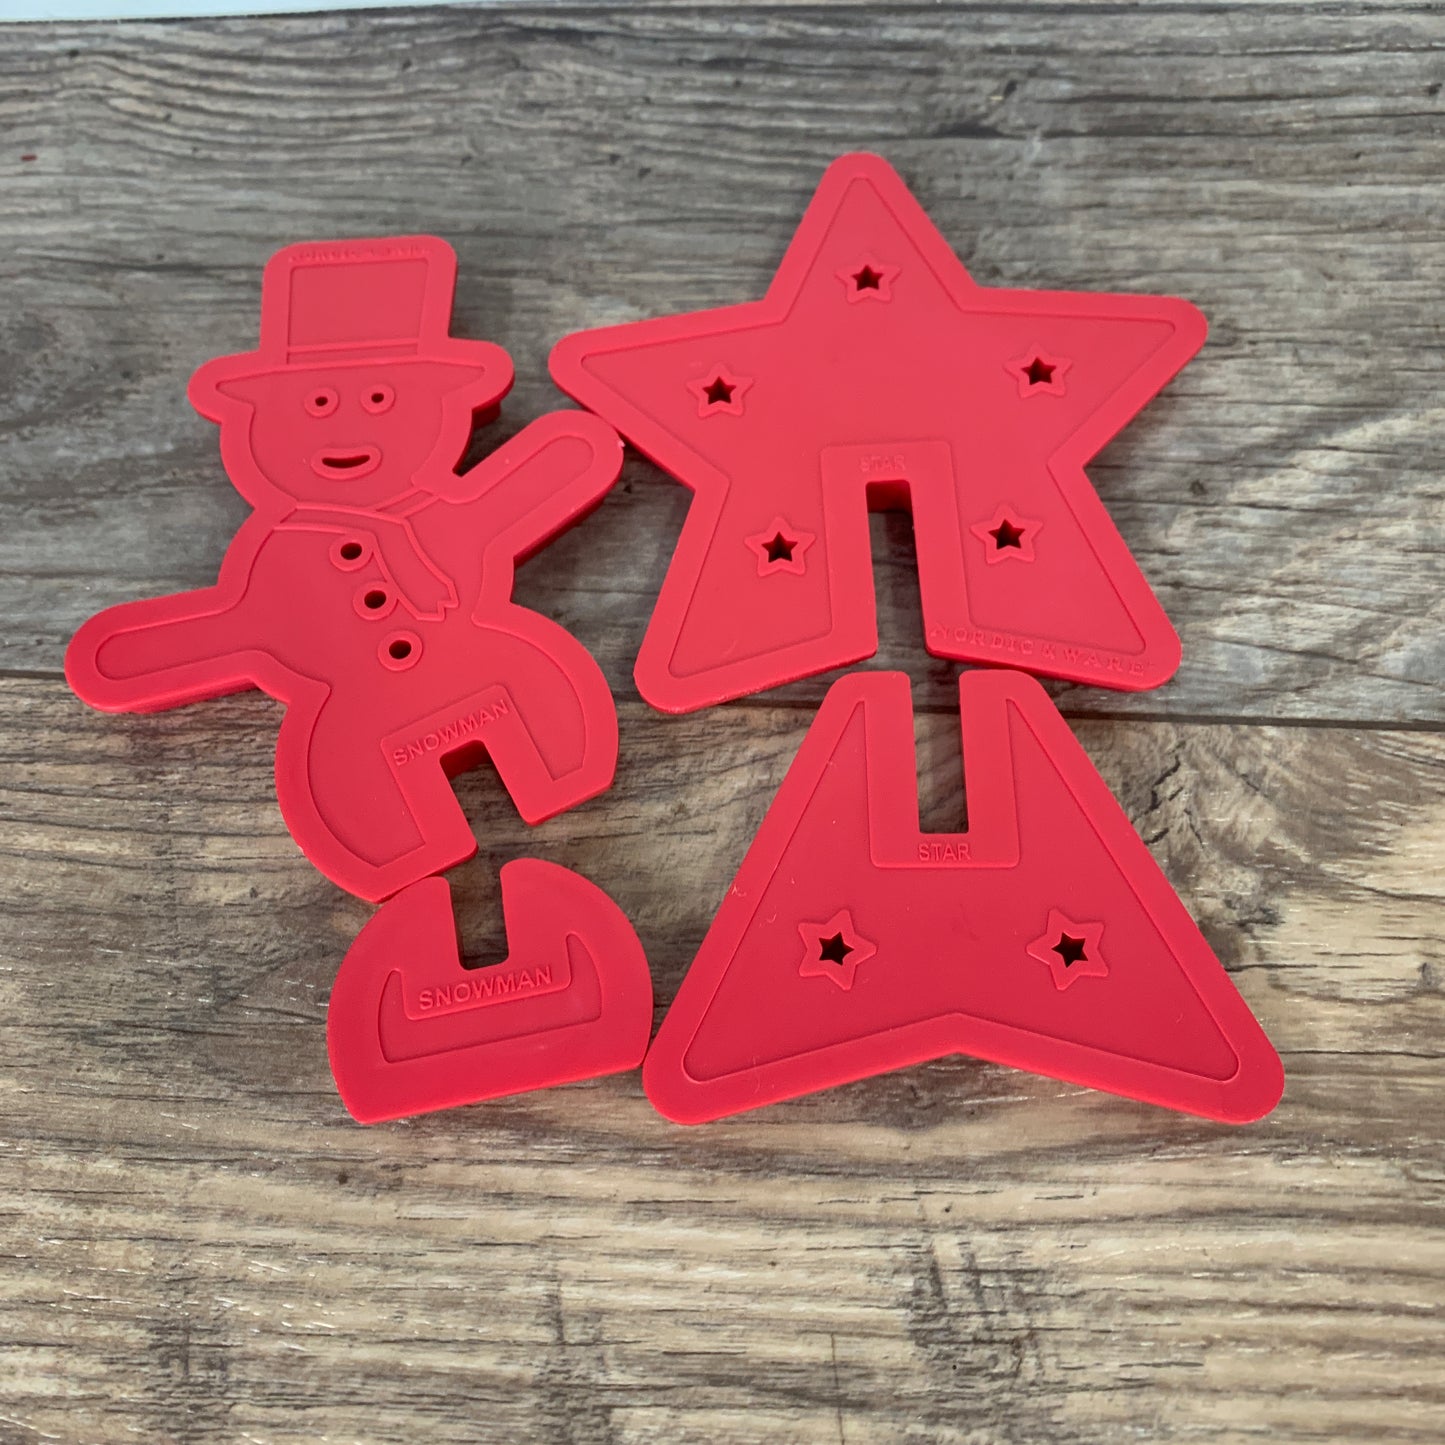 Nordic Ware Stand Up Cookie Cutters, Christmas Cookie Cutters - Complete Set